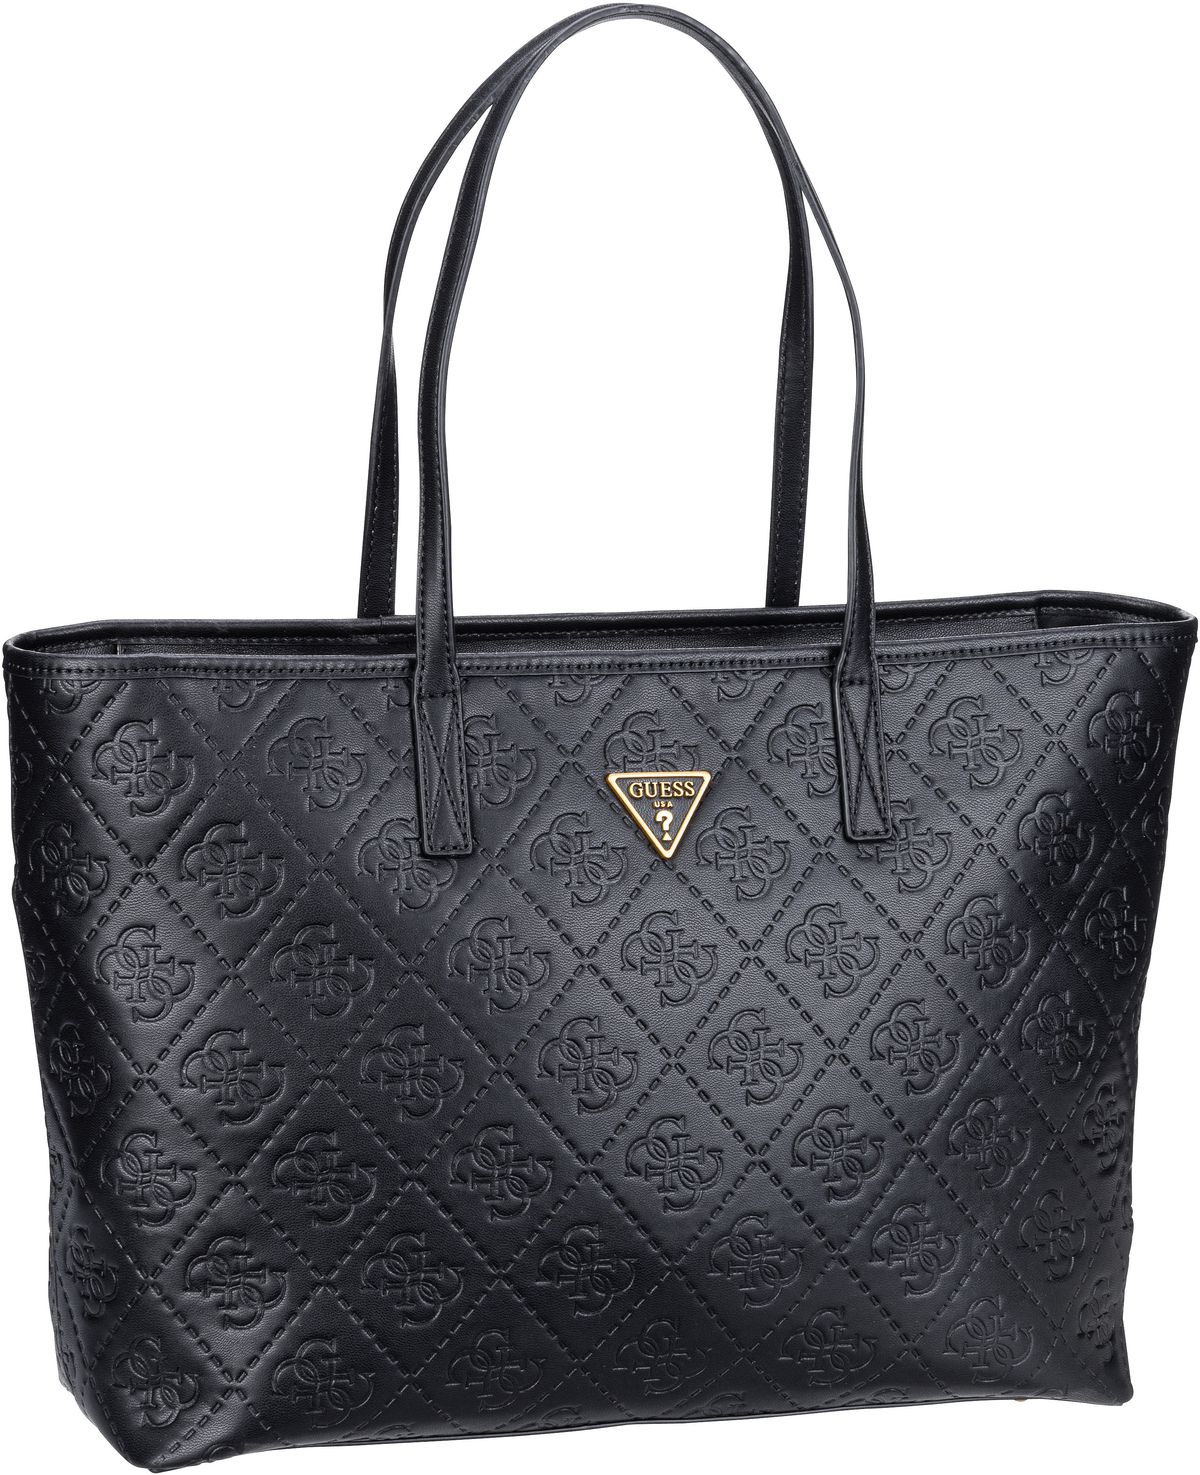 Guess Guess Power Play Large Tech Tote in Schwarz (20.8 Liter), Shopper